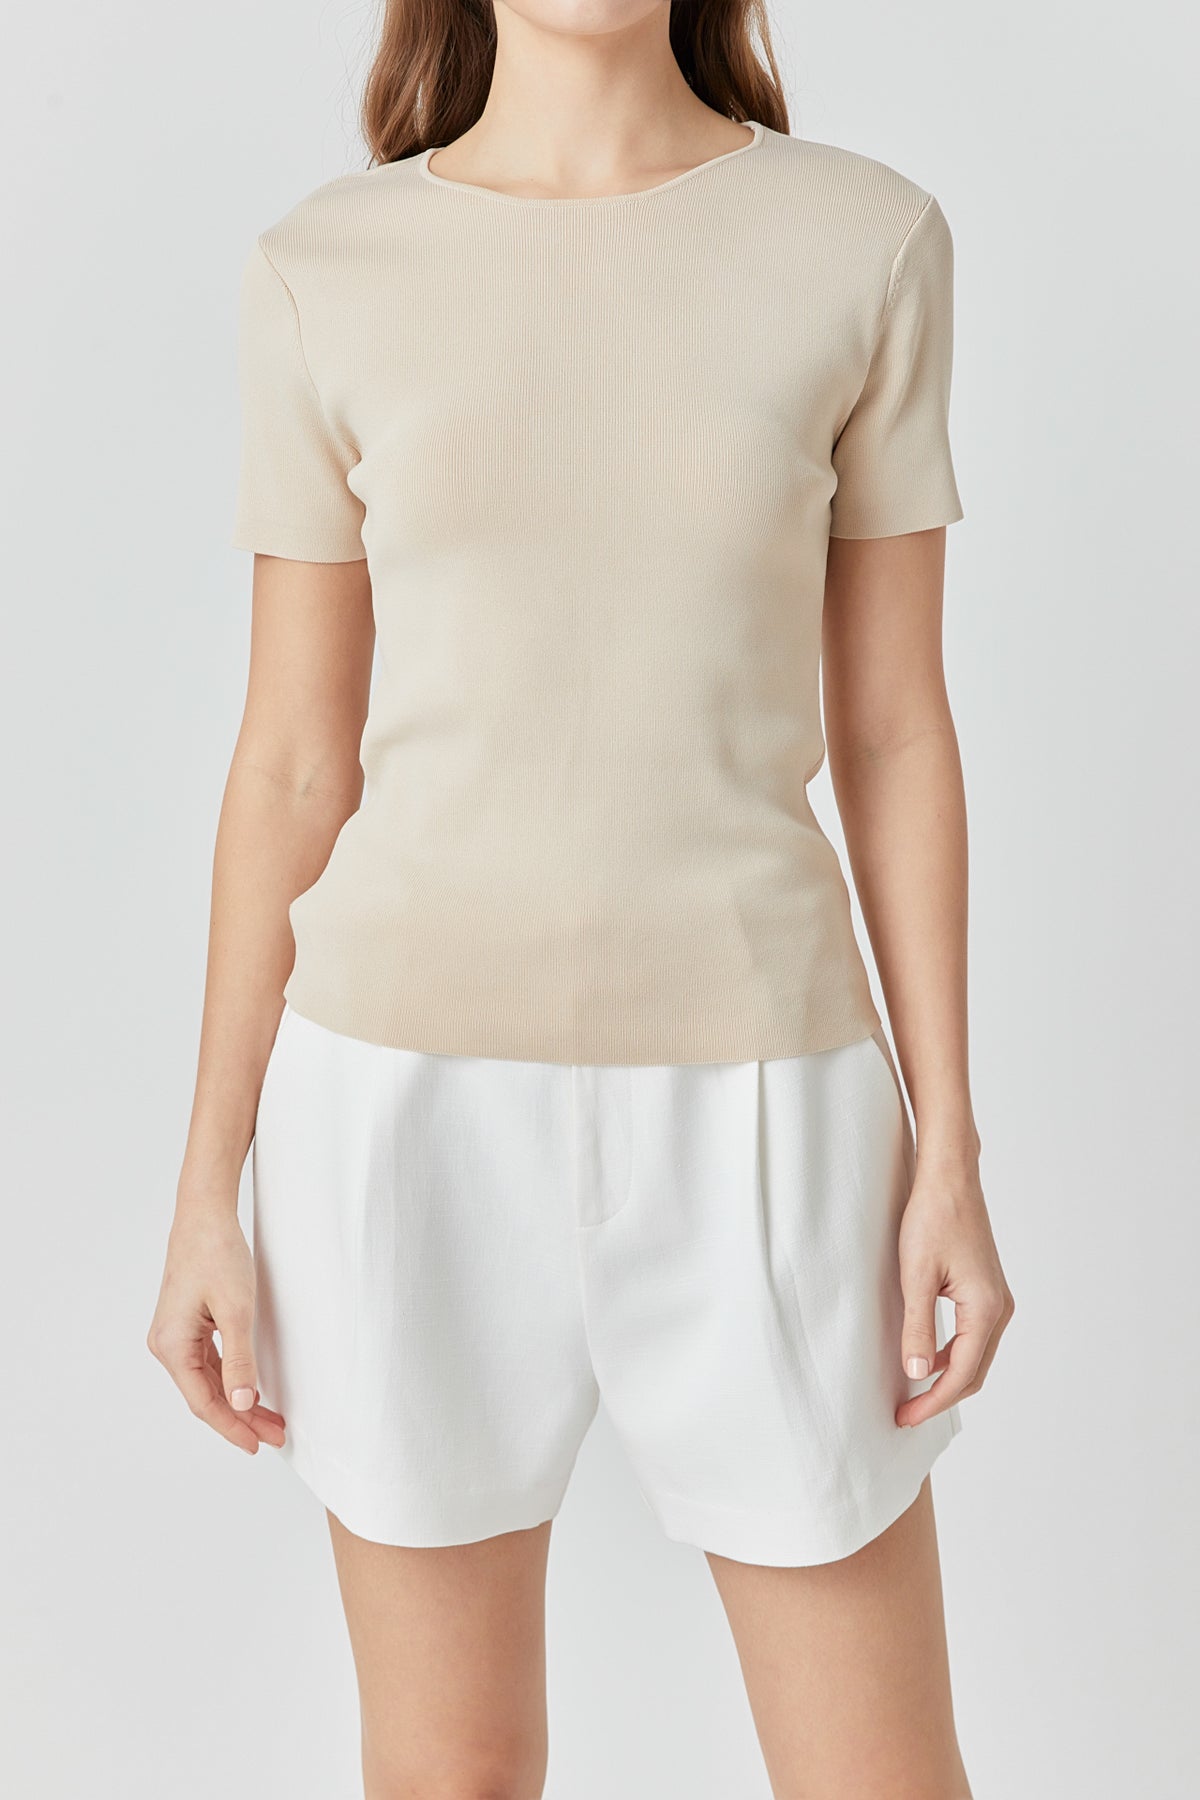 ENDLESS ROSE - Back Cut-out Detail Knit Top - TOPS available at Objectrare